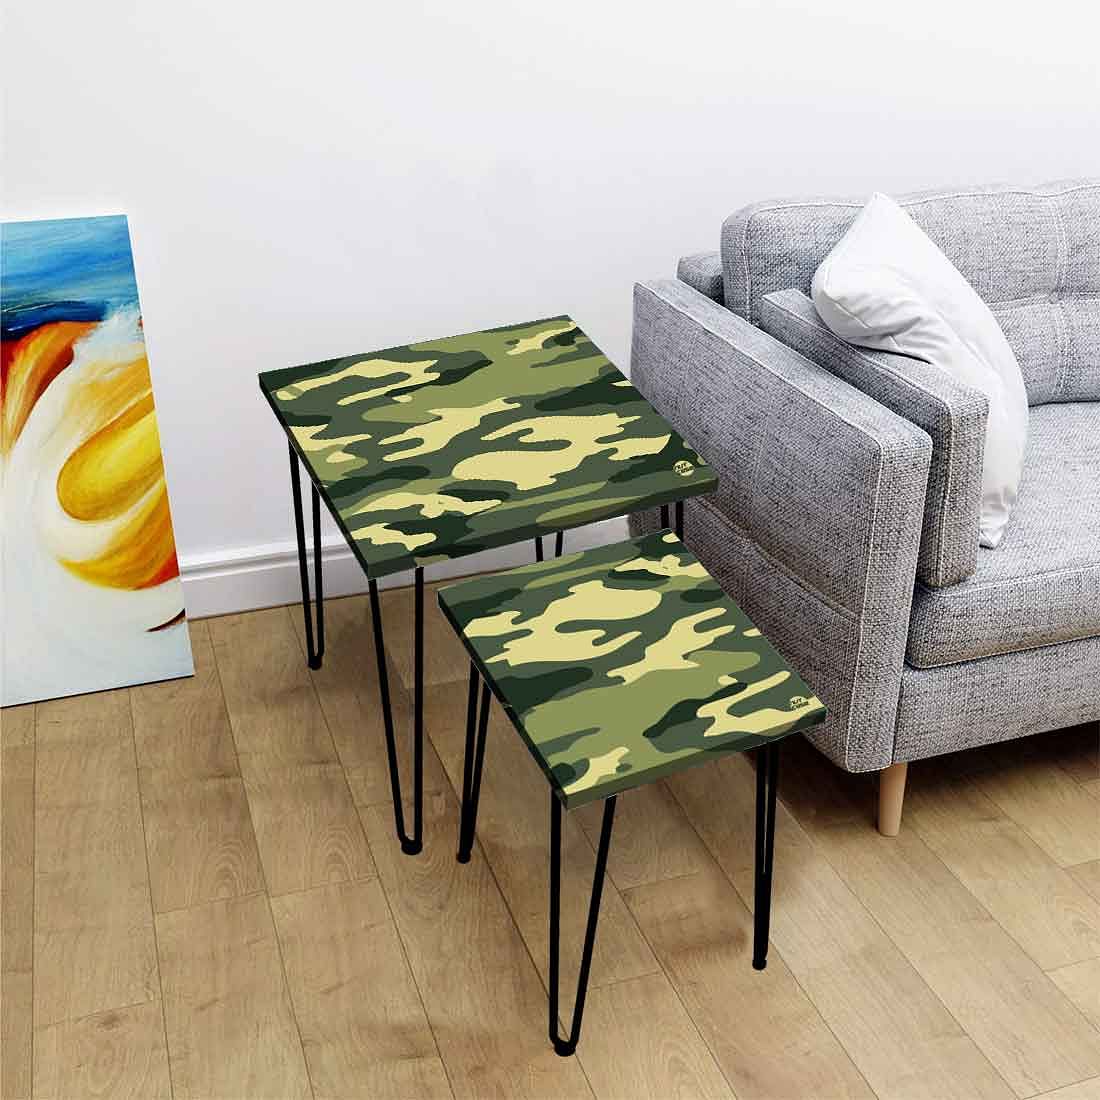 Hairpin Nesting Tables Set of 2 with Printed Top - Army Camouflage Nutcase